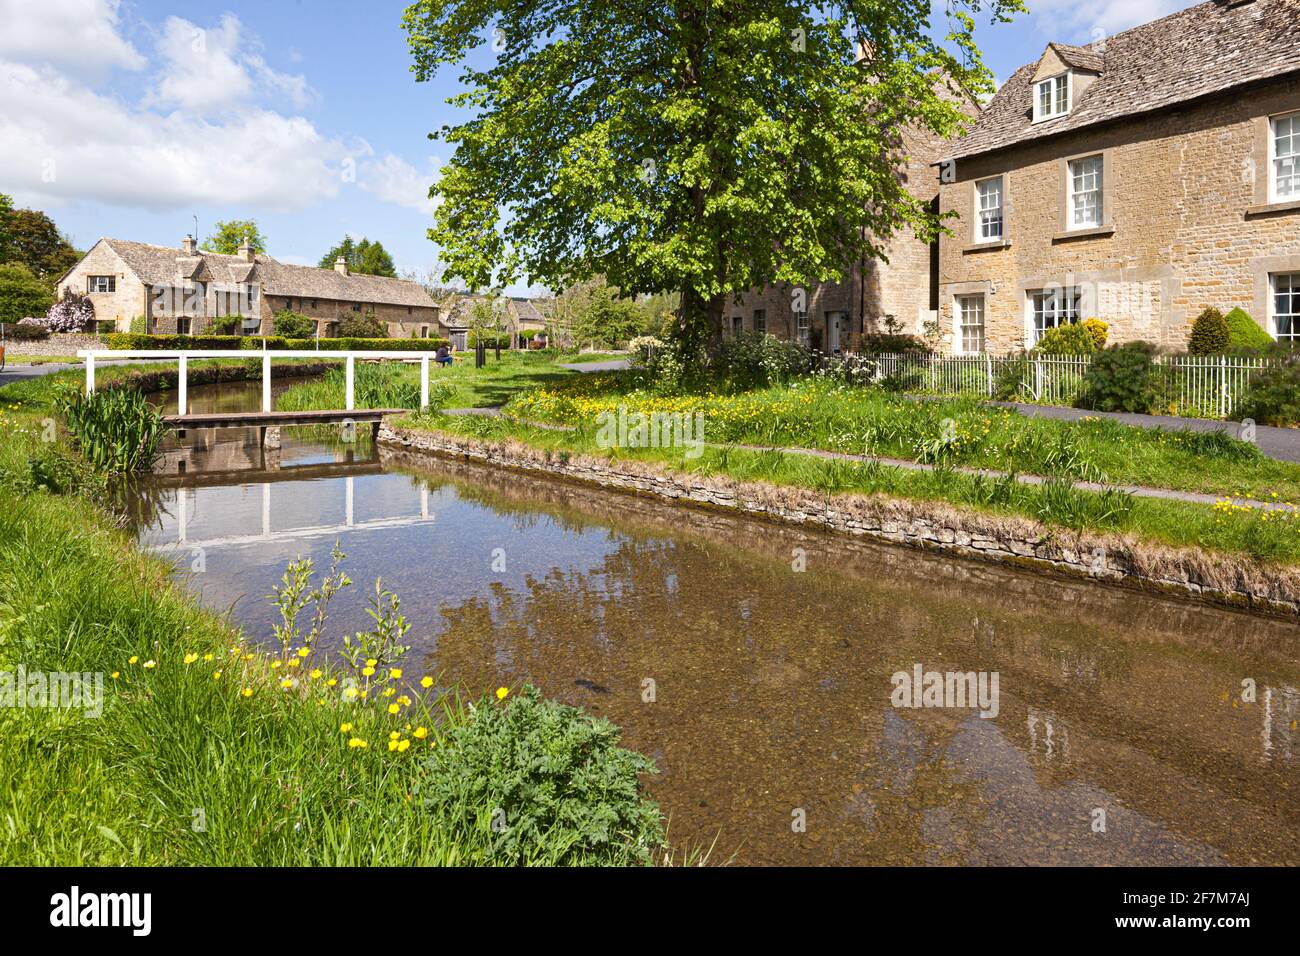 The River Eye flowing through the Cotswold village of Lower Slaughter, Gloucestershire UK Stock Photo